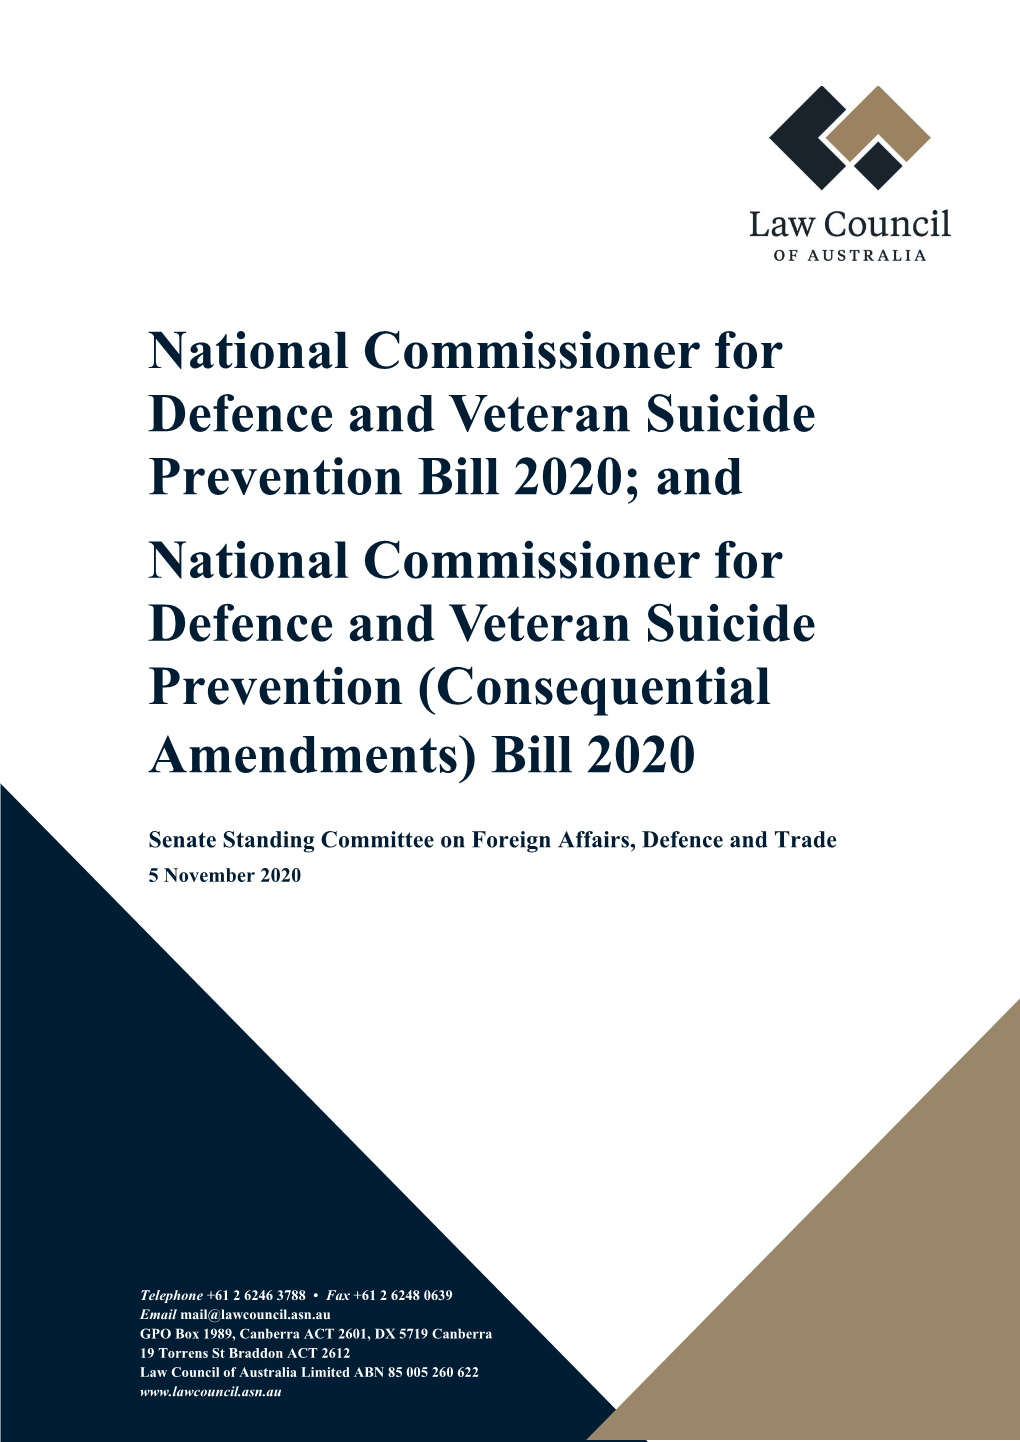 And National Commissioner for Defence and Veteran Suicide Prevention (Consequential Amendments) Bill 2020